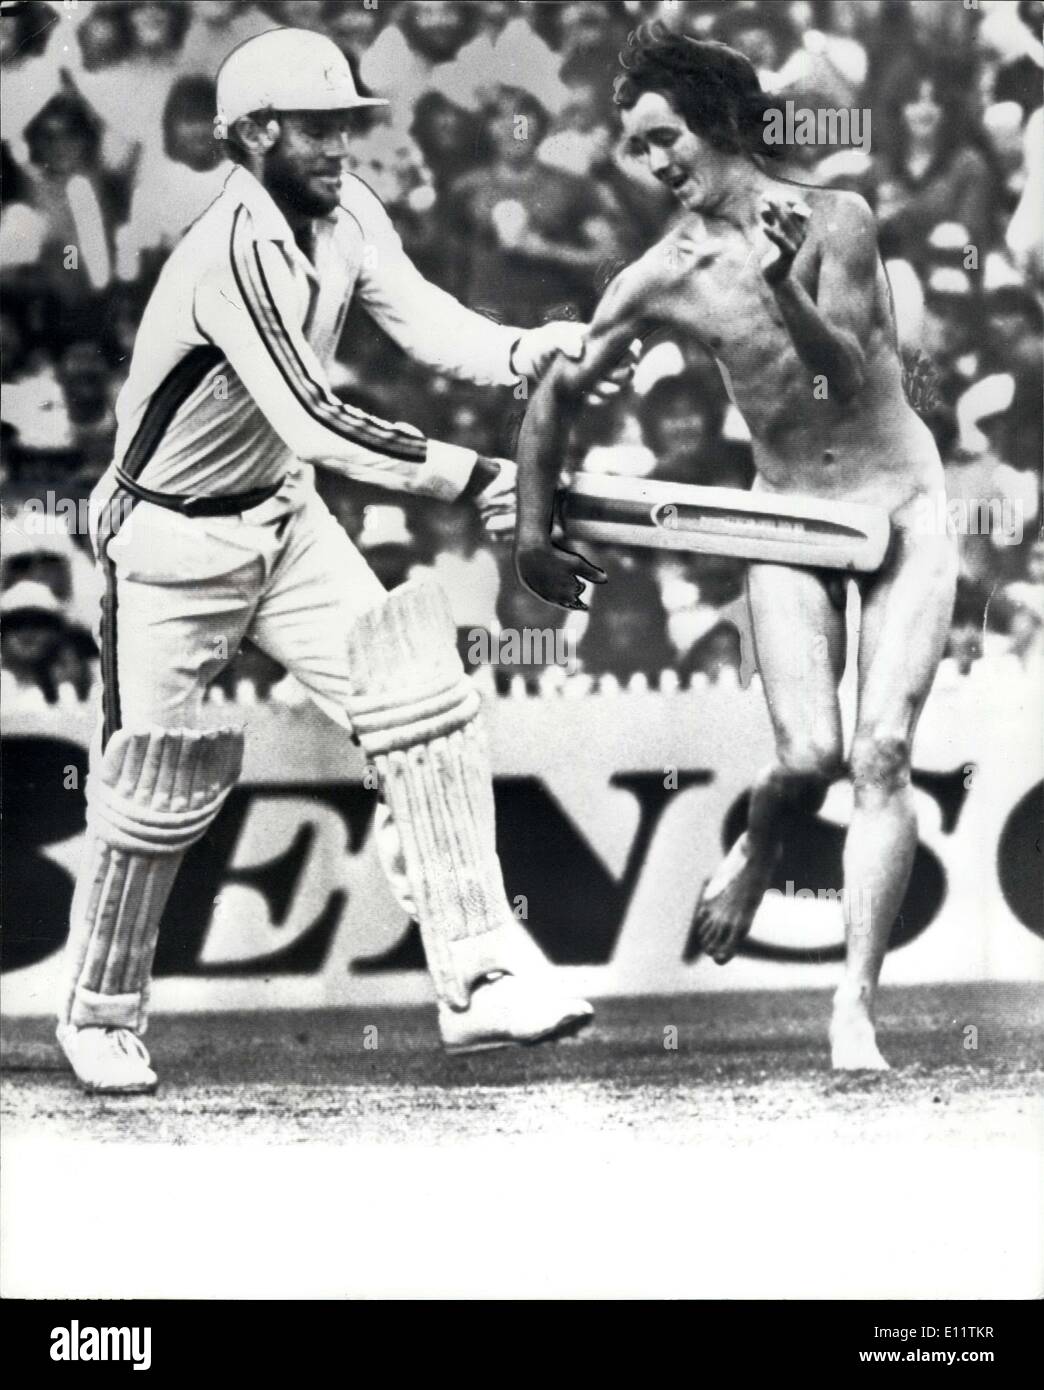 Dec. 10, 1979 - Streaker Invades world series pitch: A streaker interrupted play during the world Series match in Brisbane between Australia and West Indies. Photo Shows Australian Captain Greg Chappell covers up the Vital part of the streaker with his bat. Stock Photo